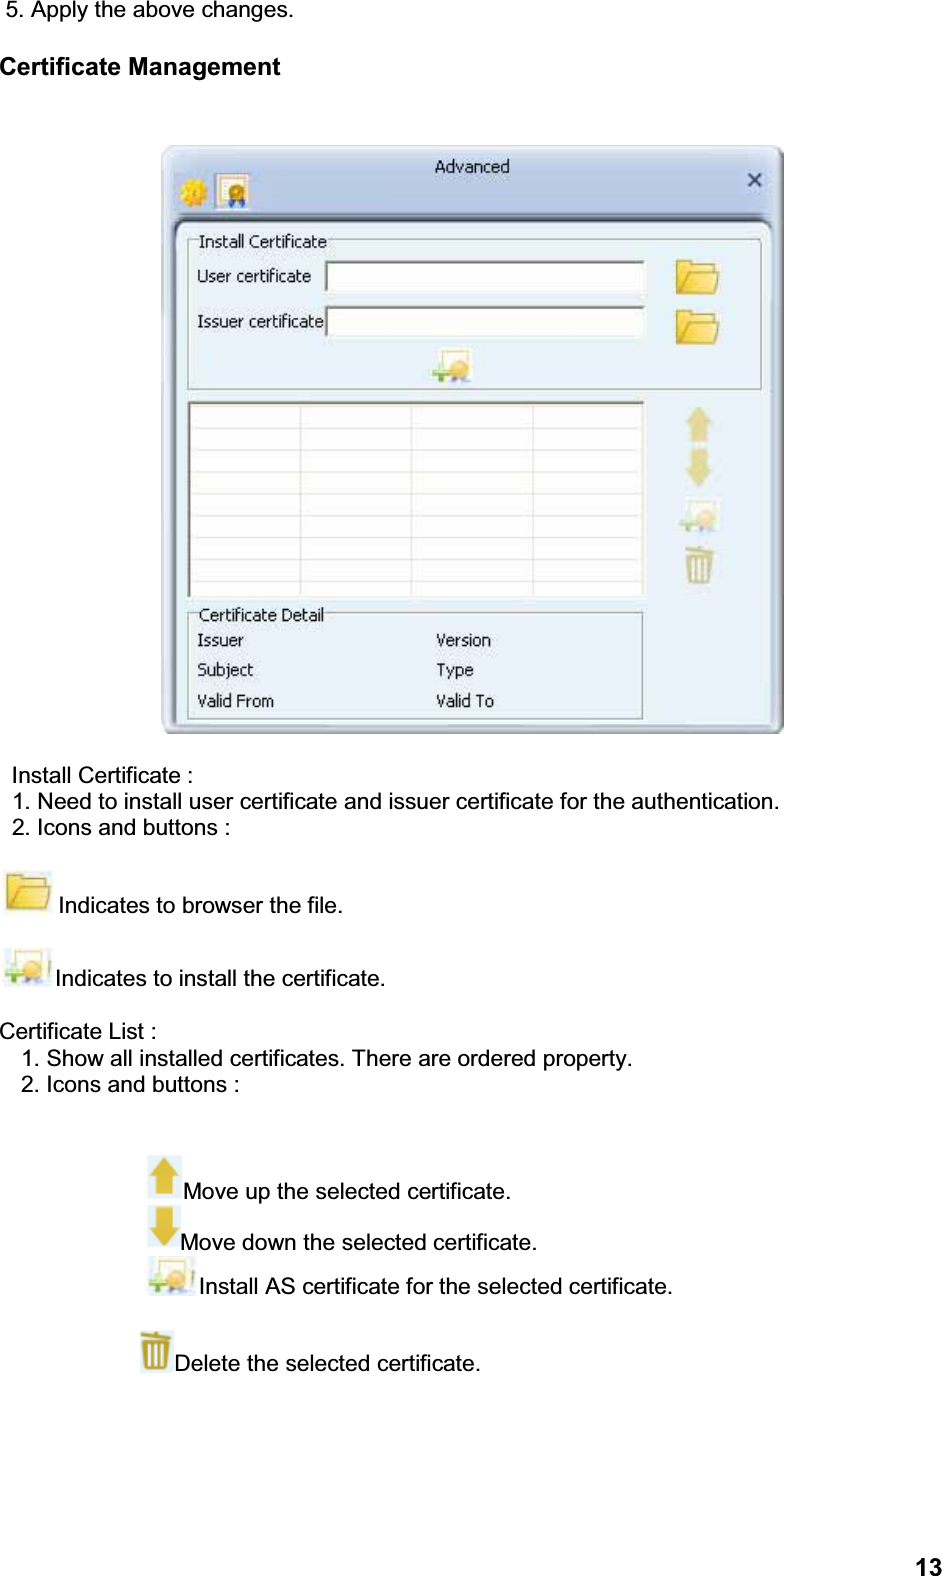 135. Apply the above changes.Certificate ManagementInstall Certificate :1. Need to install user certificate and issuer certificate for the authentication.2. Icons and buttons :Indicates to browser the file.Indicates to install the certificate.Certificate List :1. Show all installed certificates. There are ordered property.2. Icons and buttons :Move up the selected certificate.Move down the selected certificate.Install AS certificate for the selected certificate.Delete the selected certificate.